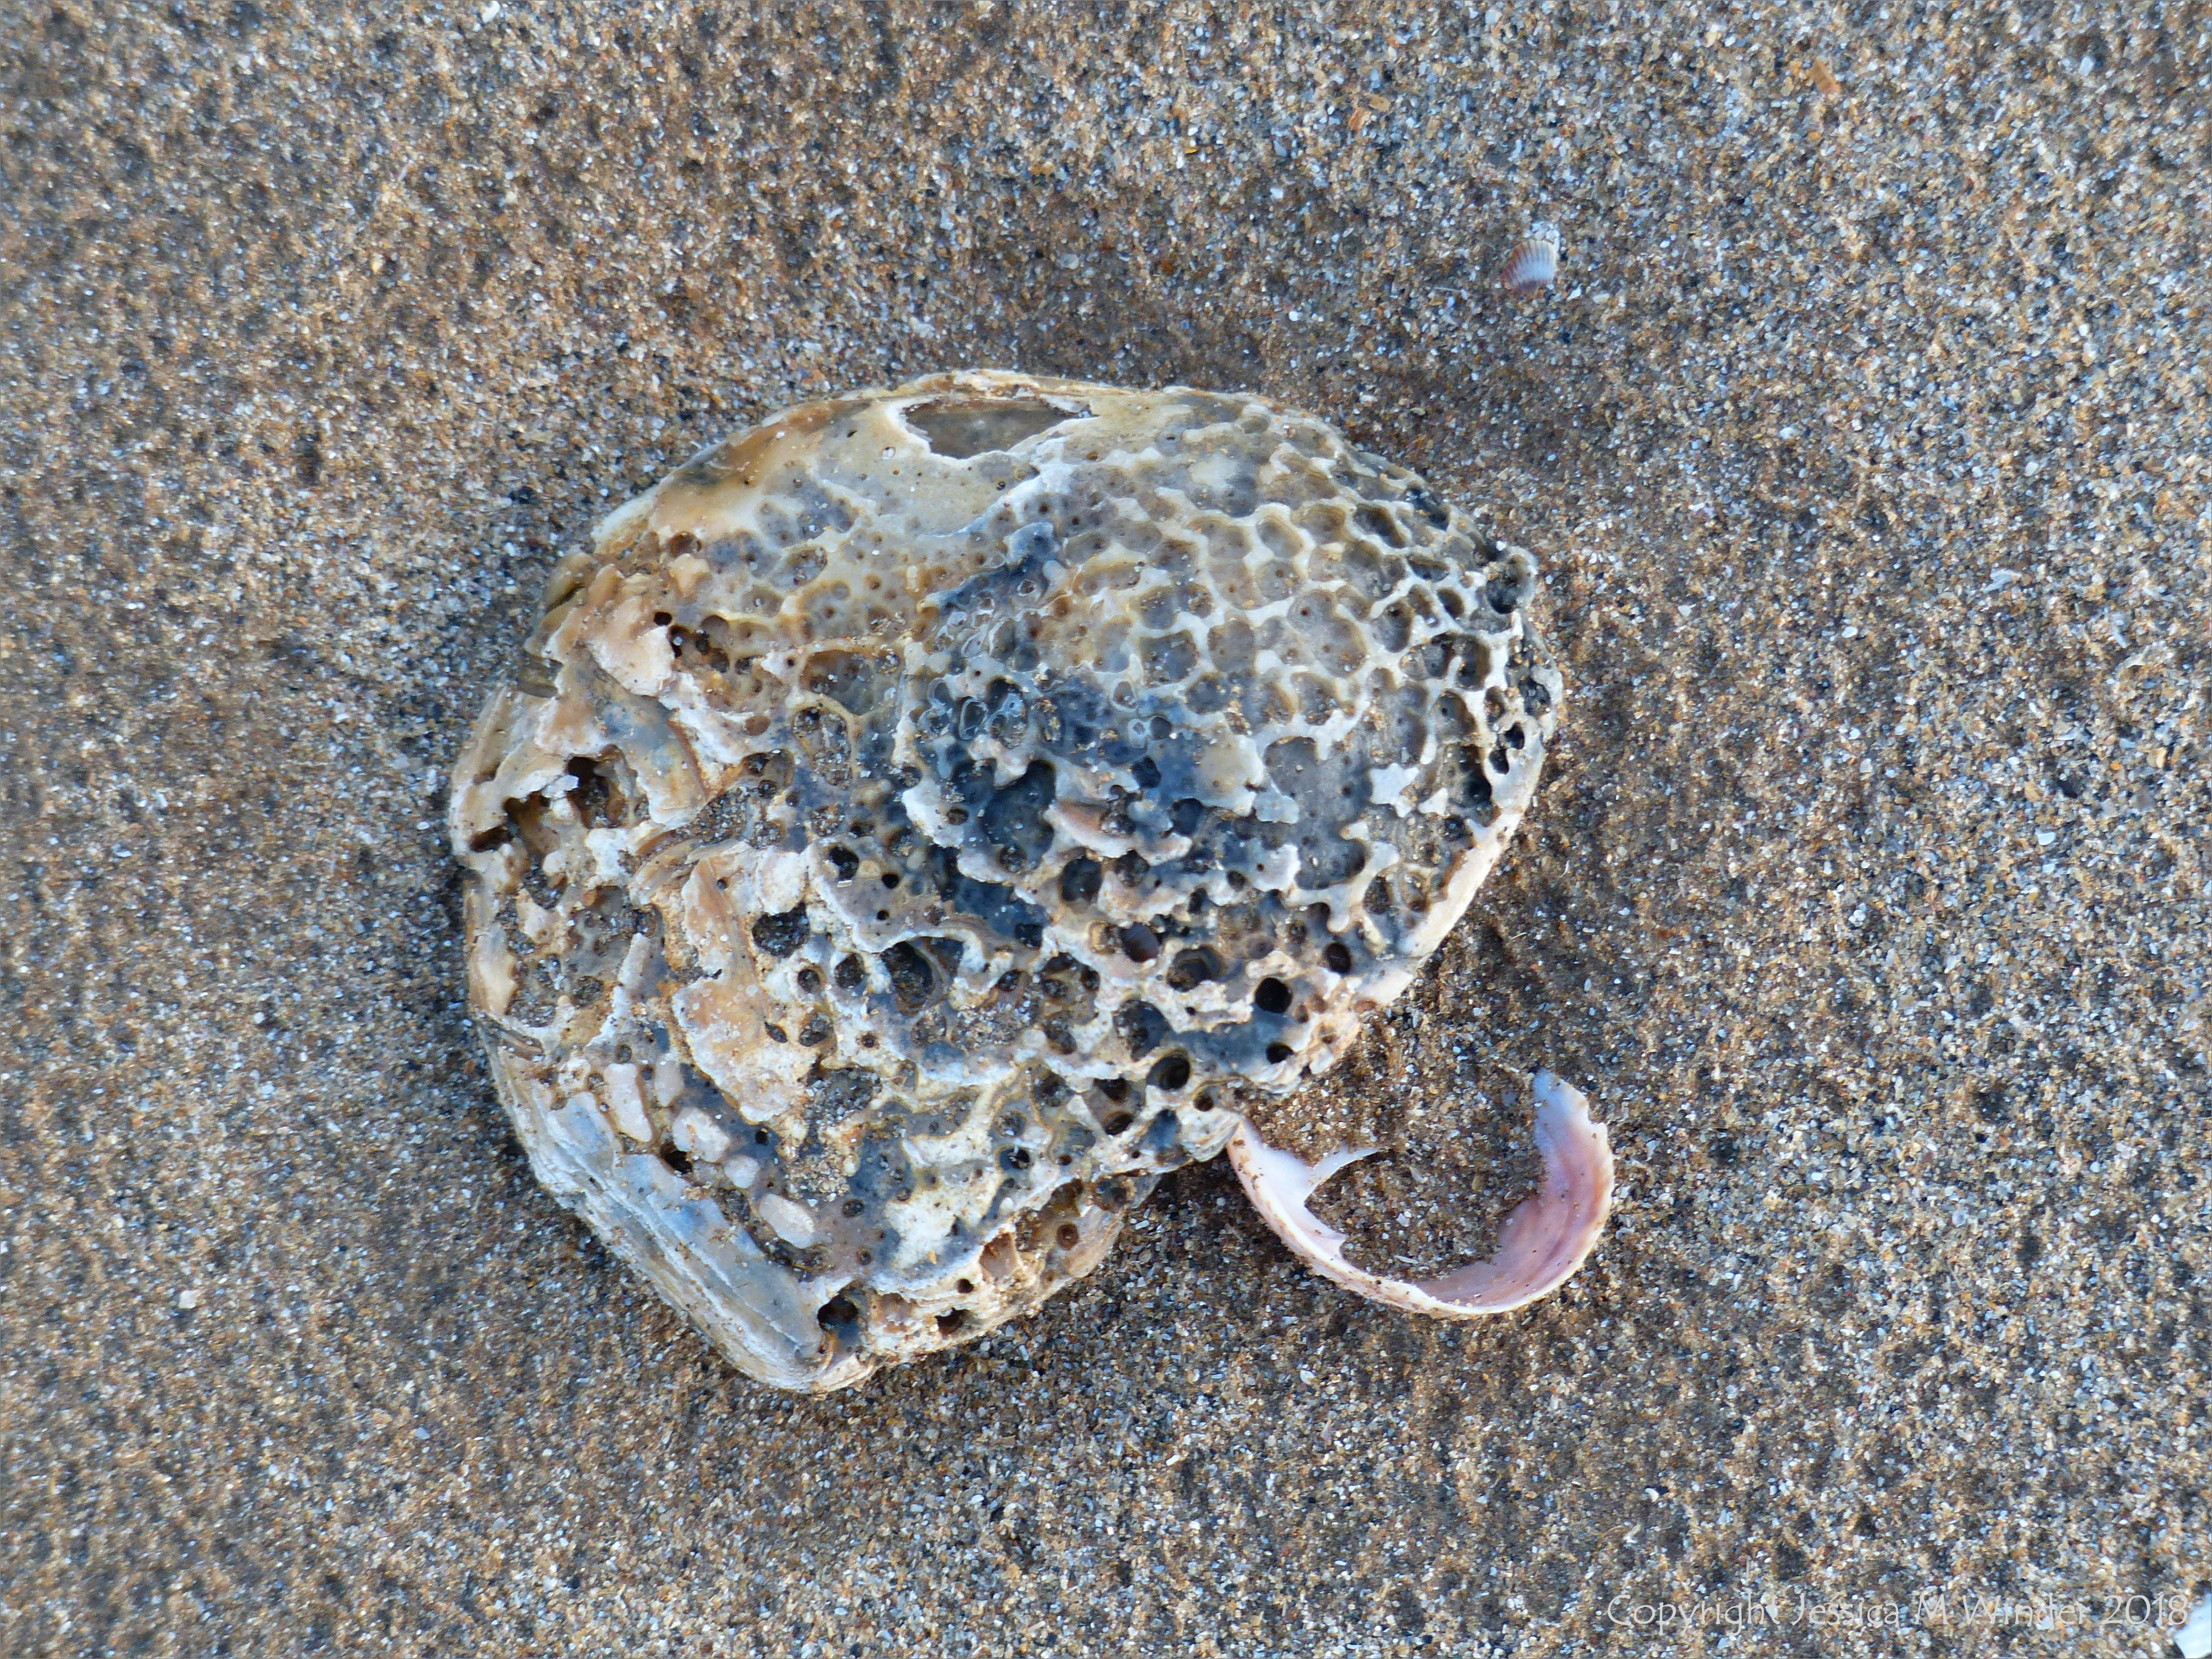 Oyster shell on beach sand with slipper limpet